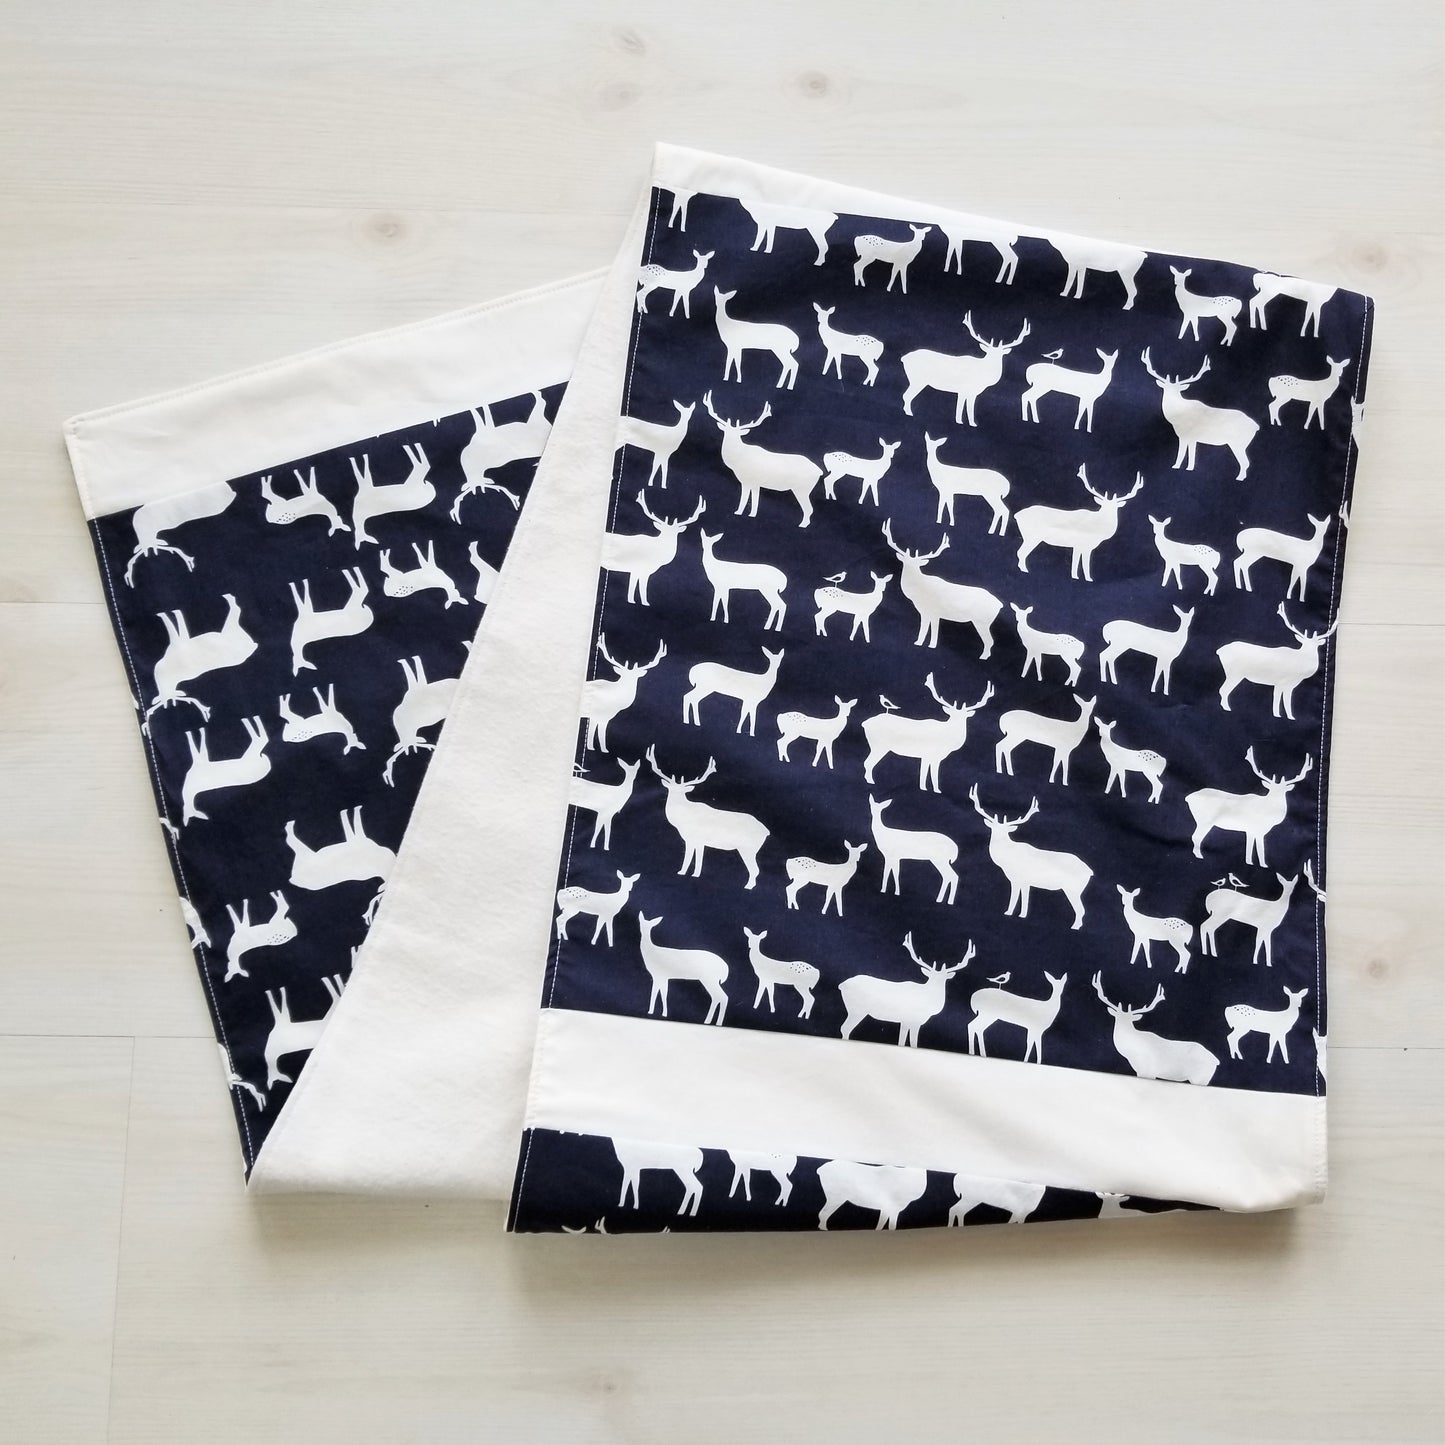 Rustic Organic Cotton Table Runner with Elk